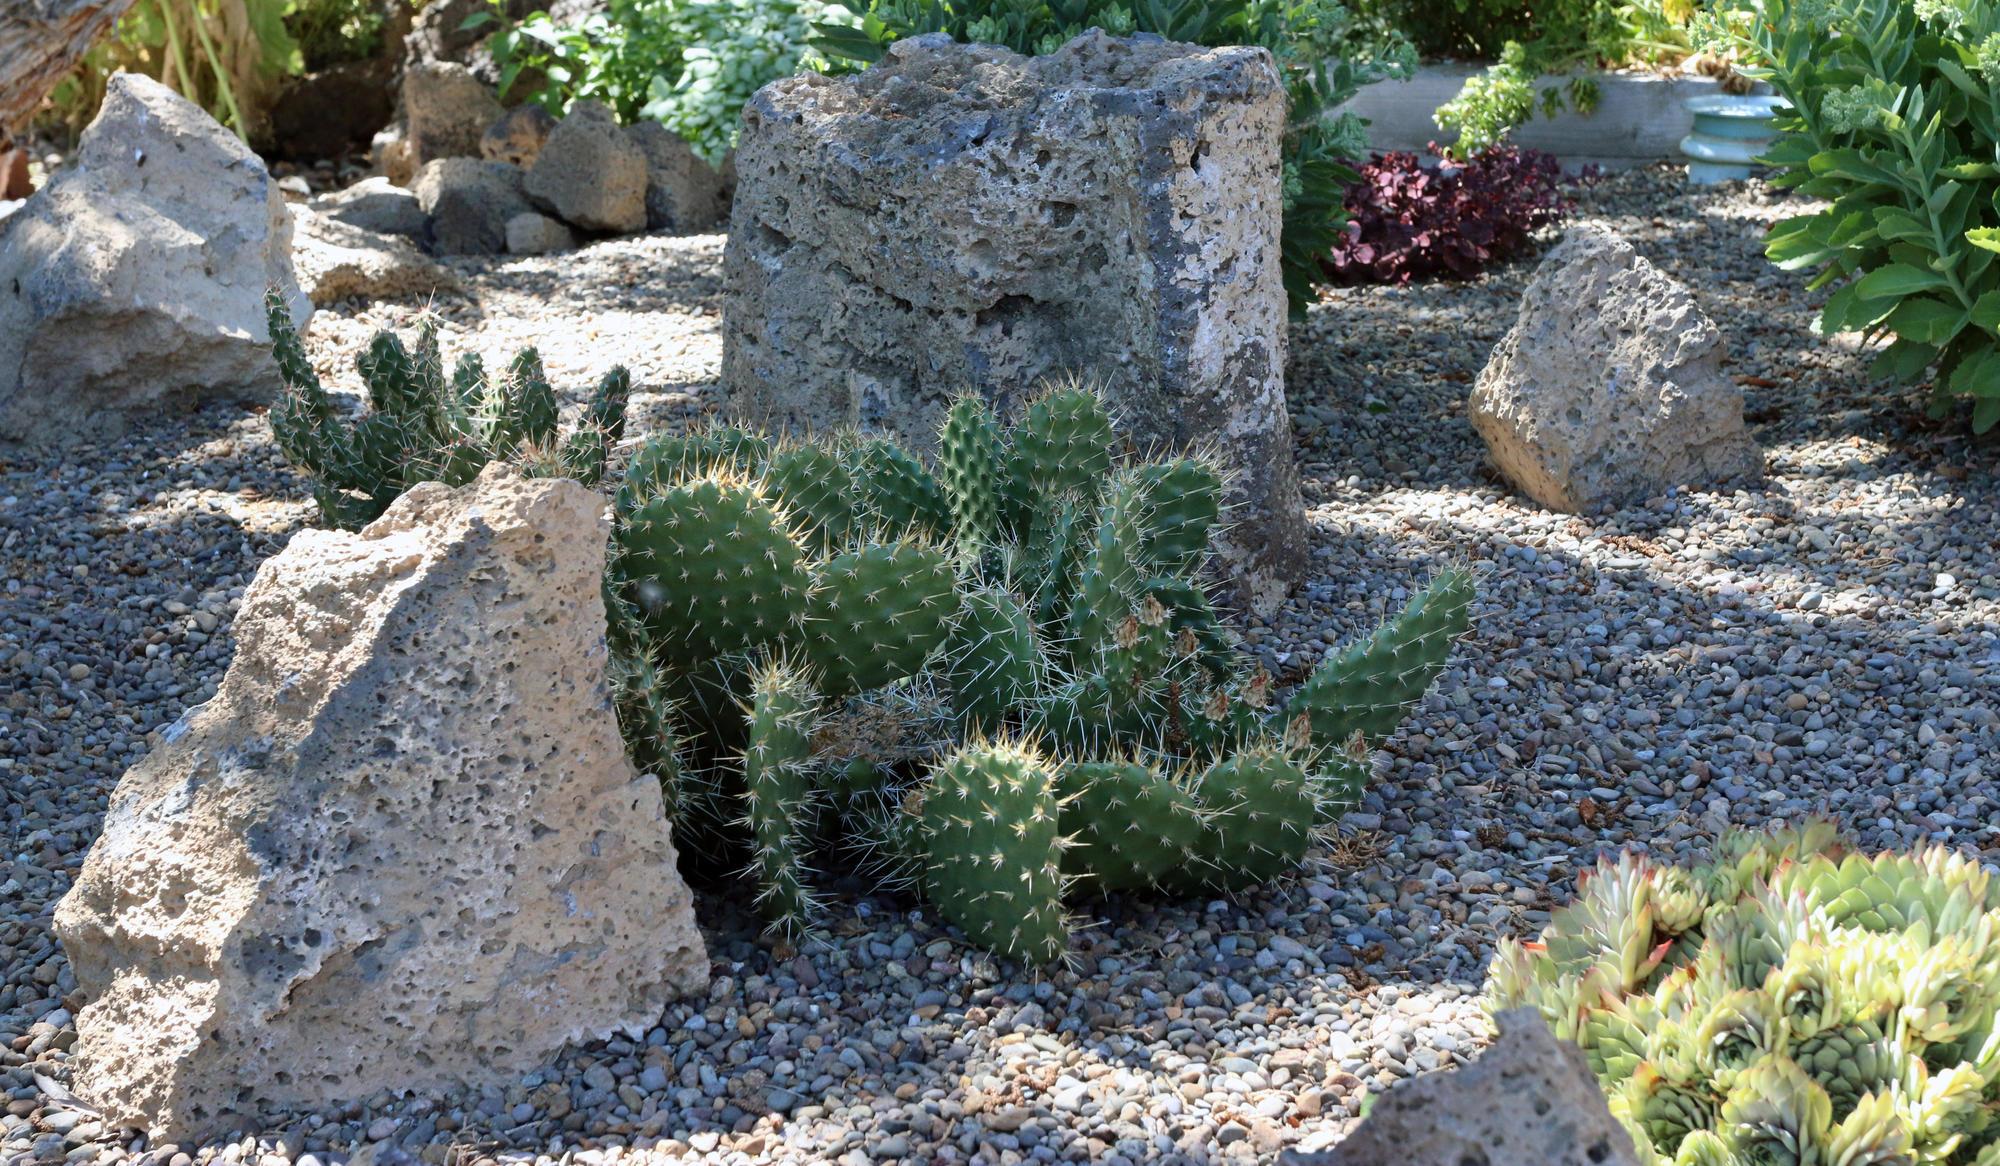 poky cactus between two boulders on gravel mulch